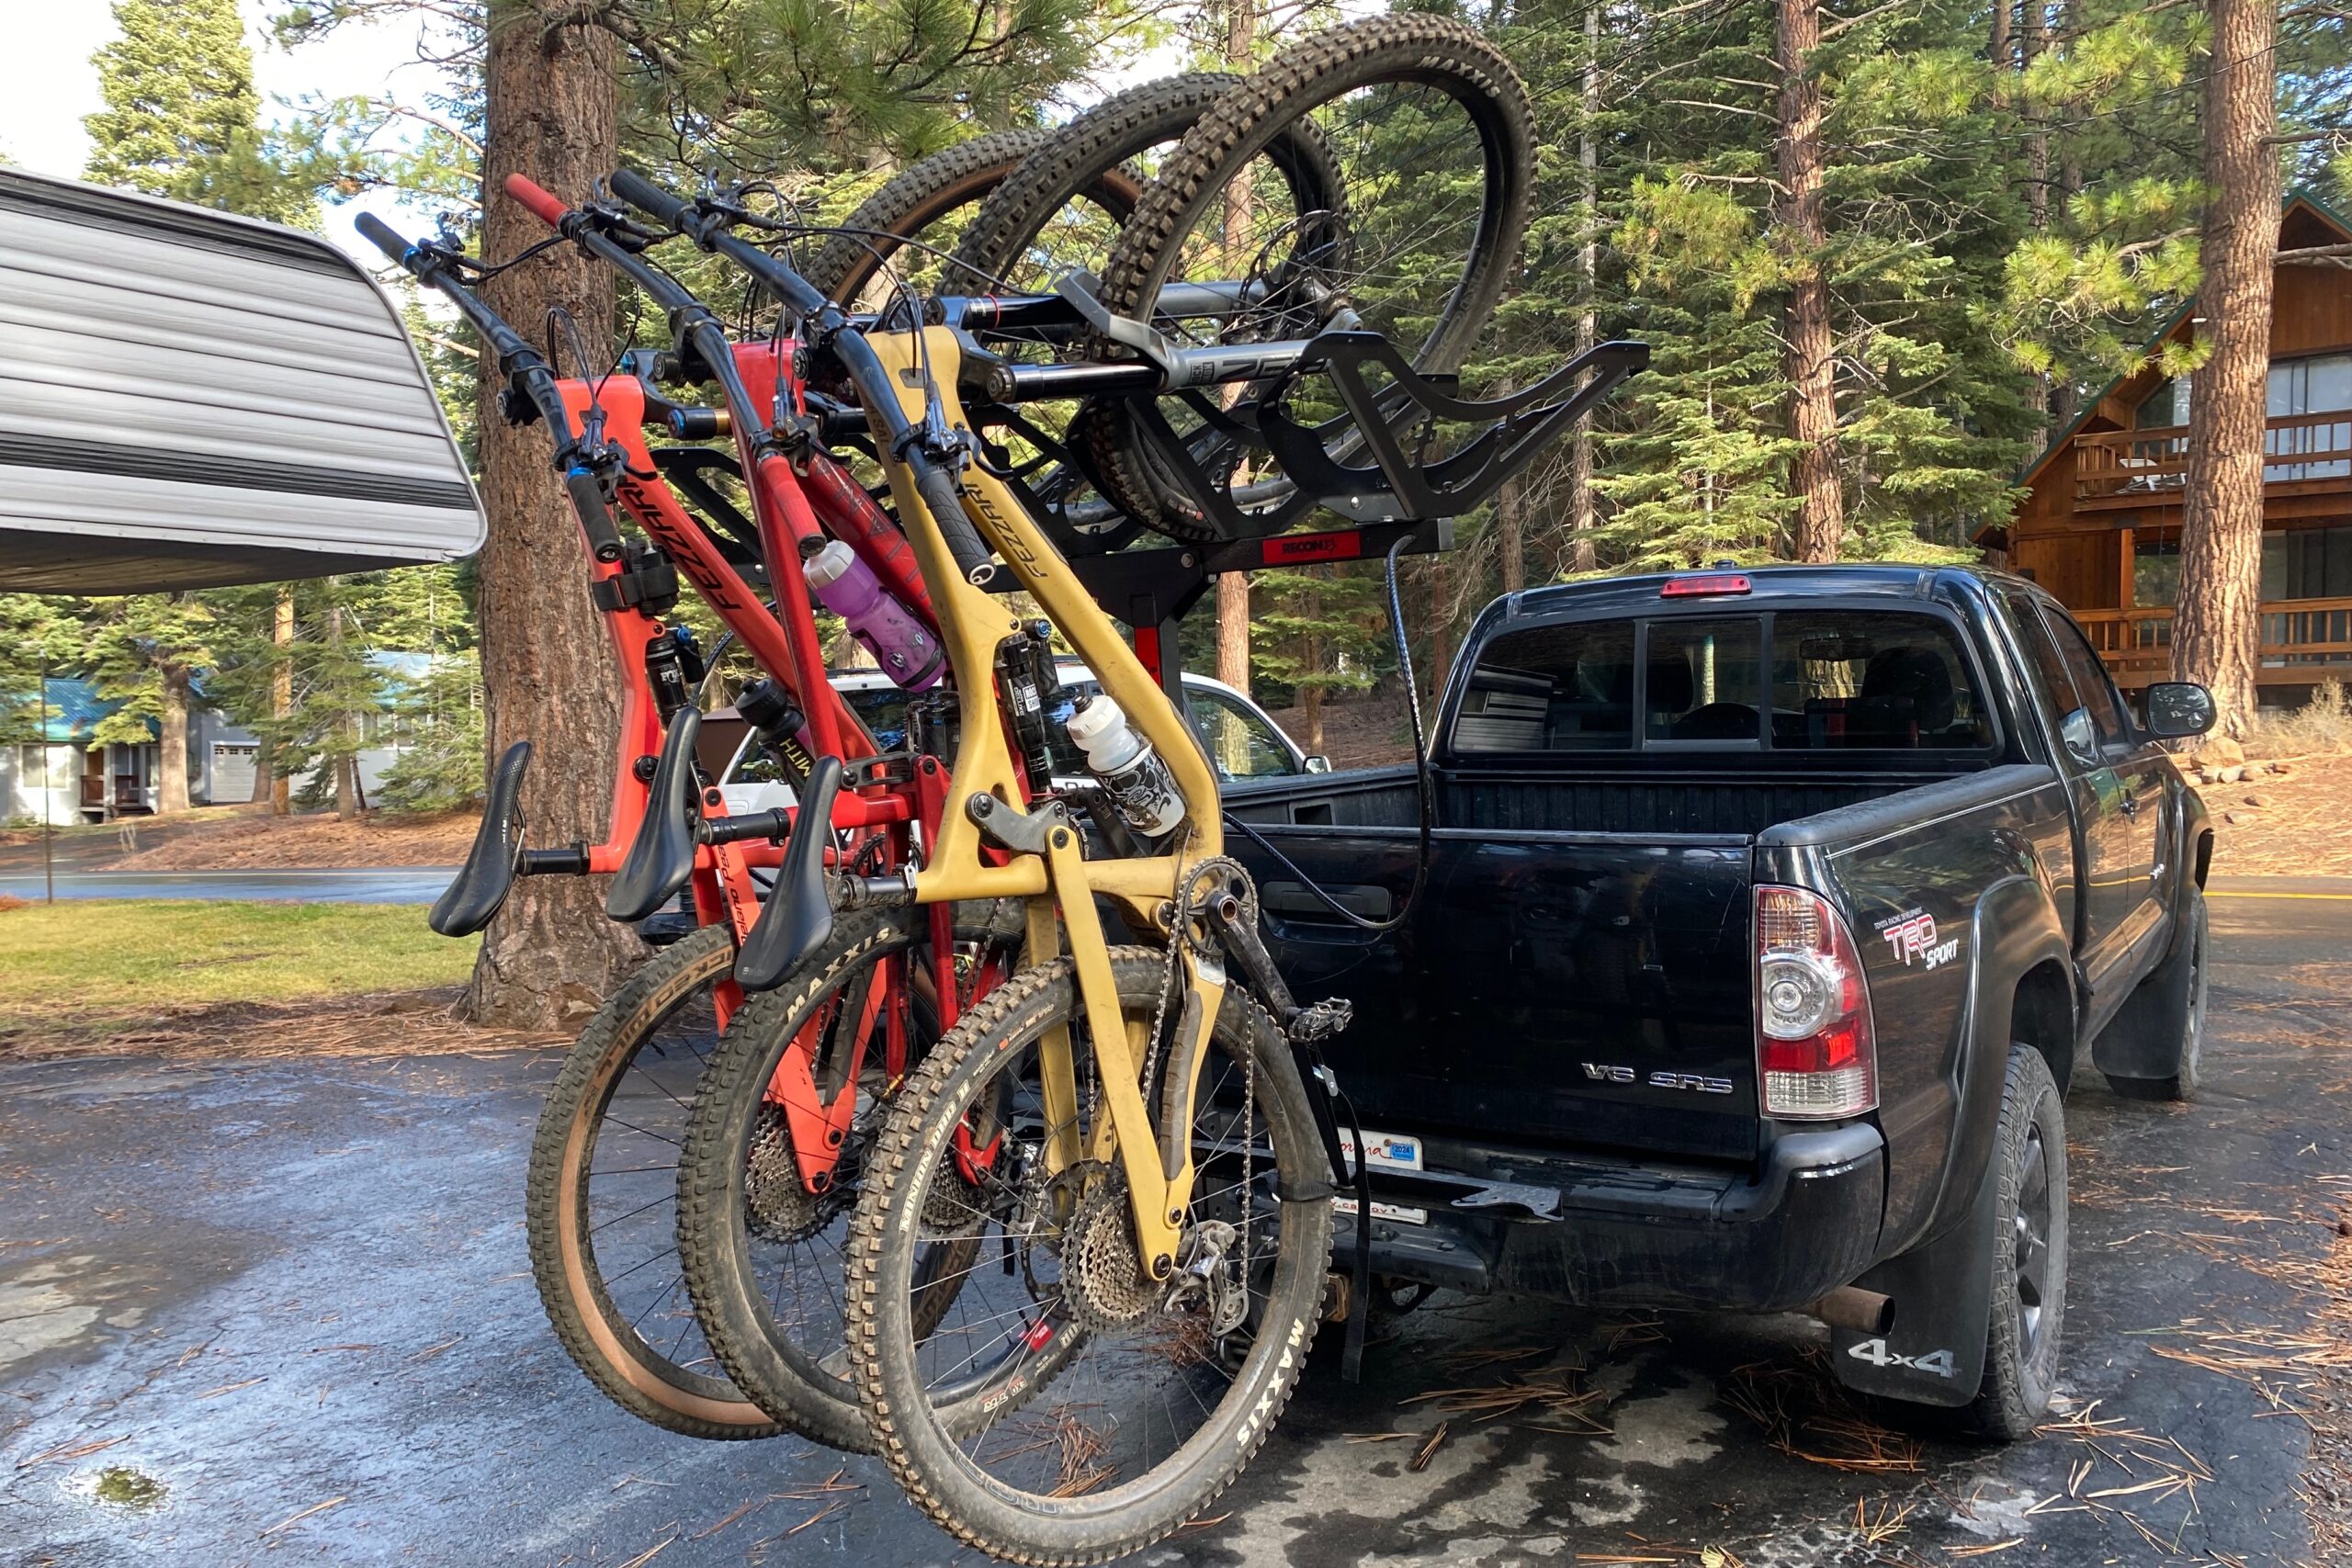 1Up Recon hitch bike rack with 3 bikes loaded